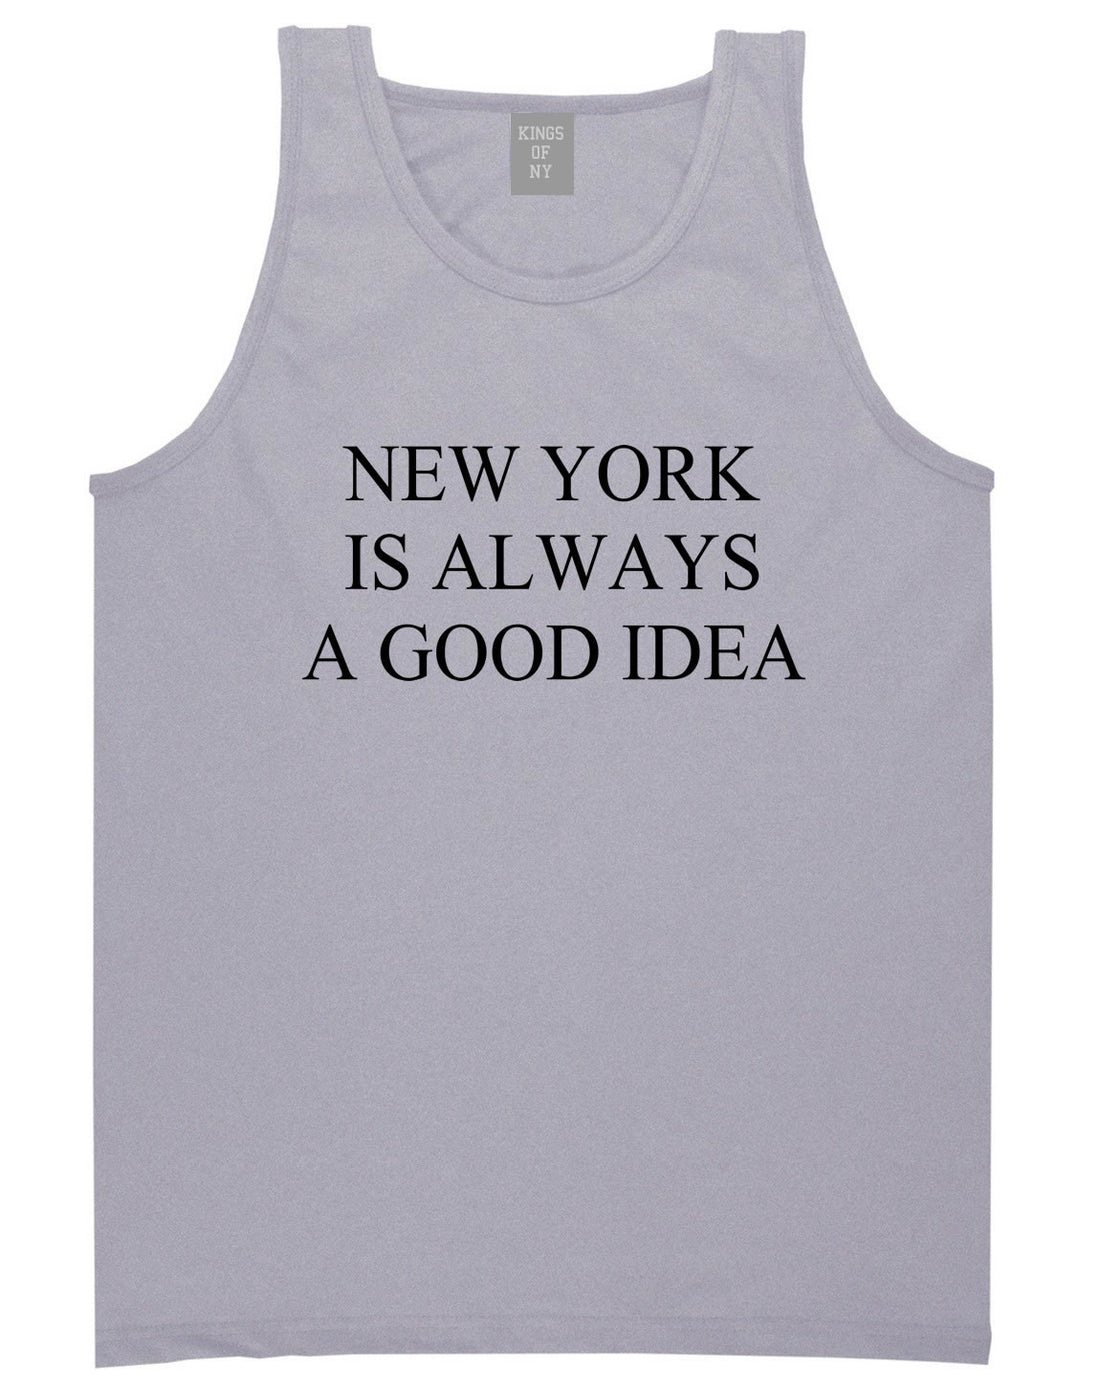 New York Is Always A Good Idea Tank Top in Grey by Kings Of NY